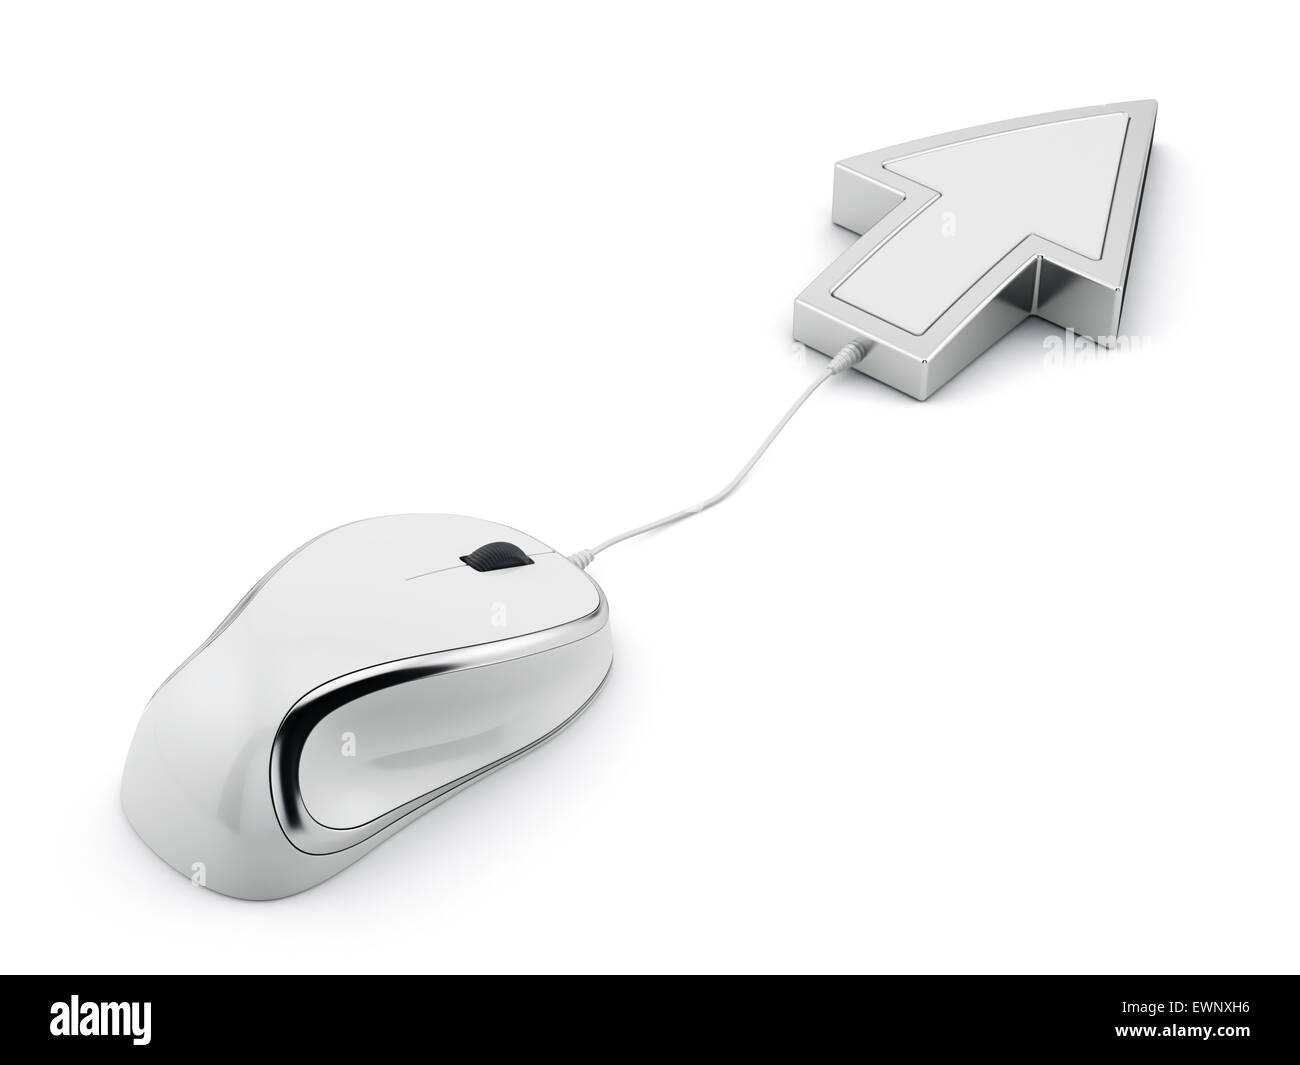 Computer Mouse Klick Pointer - 3D Illustration - Isolated on White  Background Stock Illustration - Illustration of clicking, button: 168648844